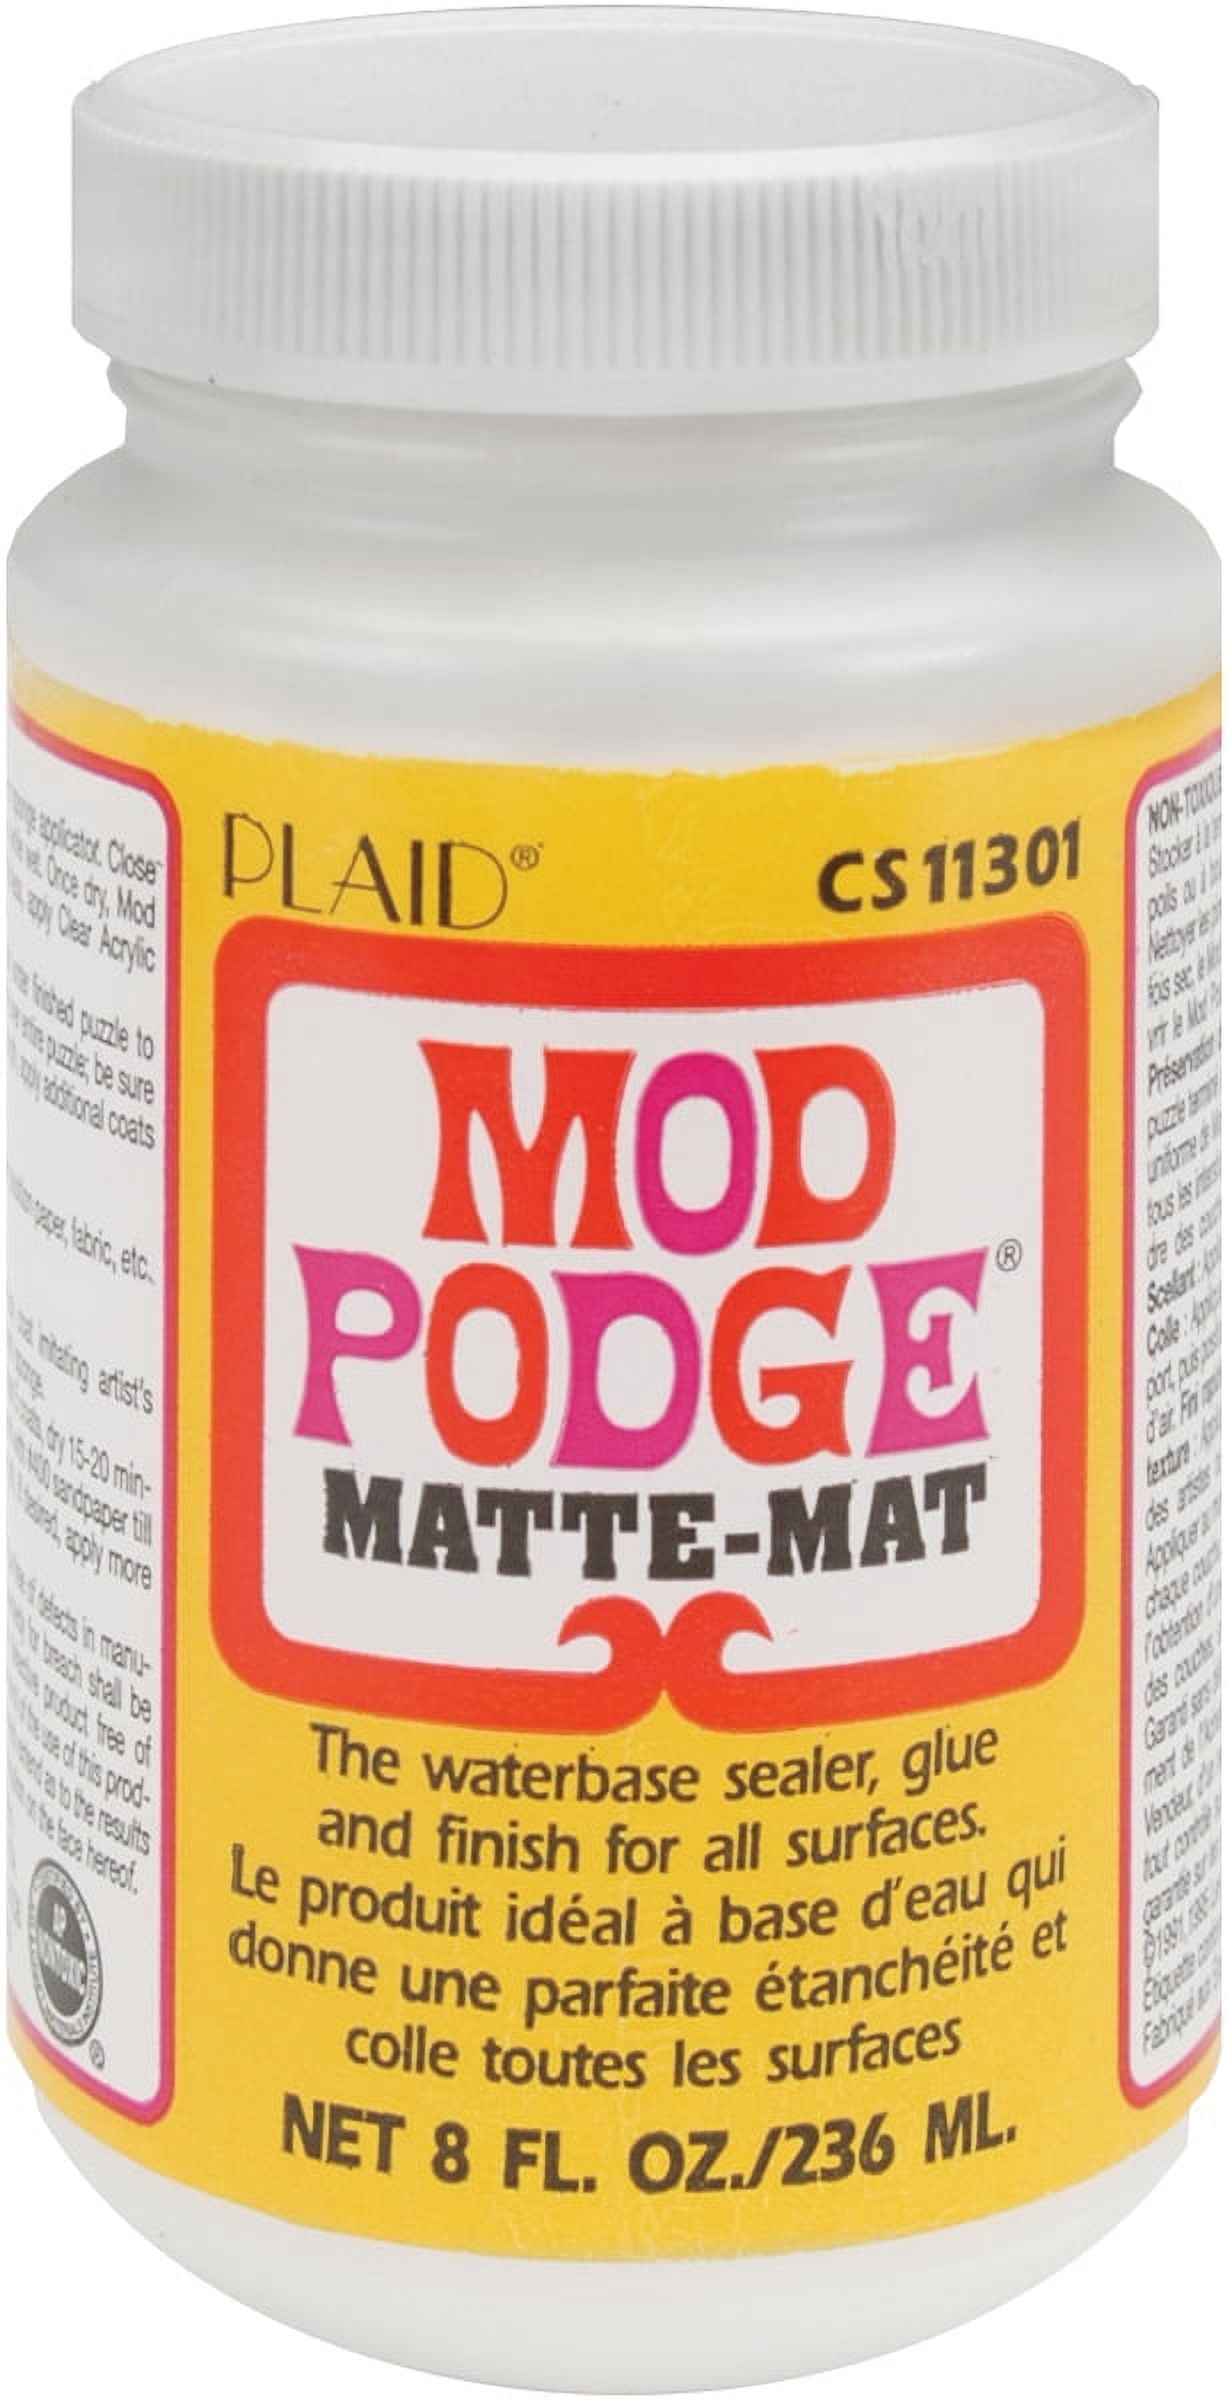 Shop Plaid Mod Podge ® 2-in-1 Smoothing Tool - 10614 - 10614